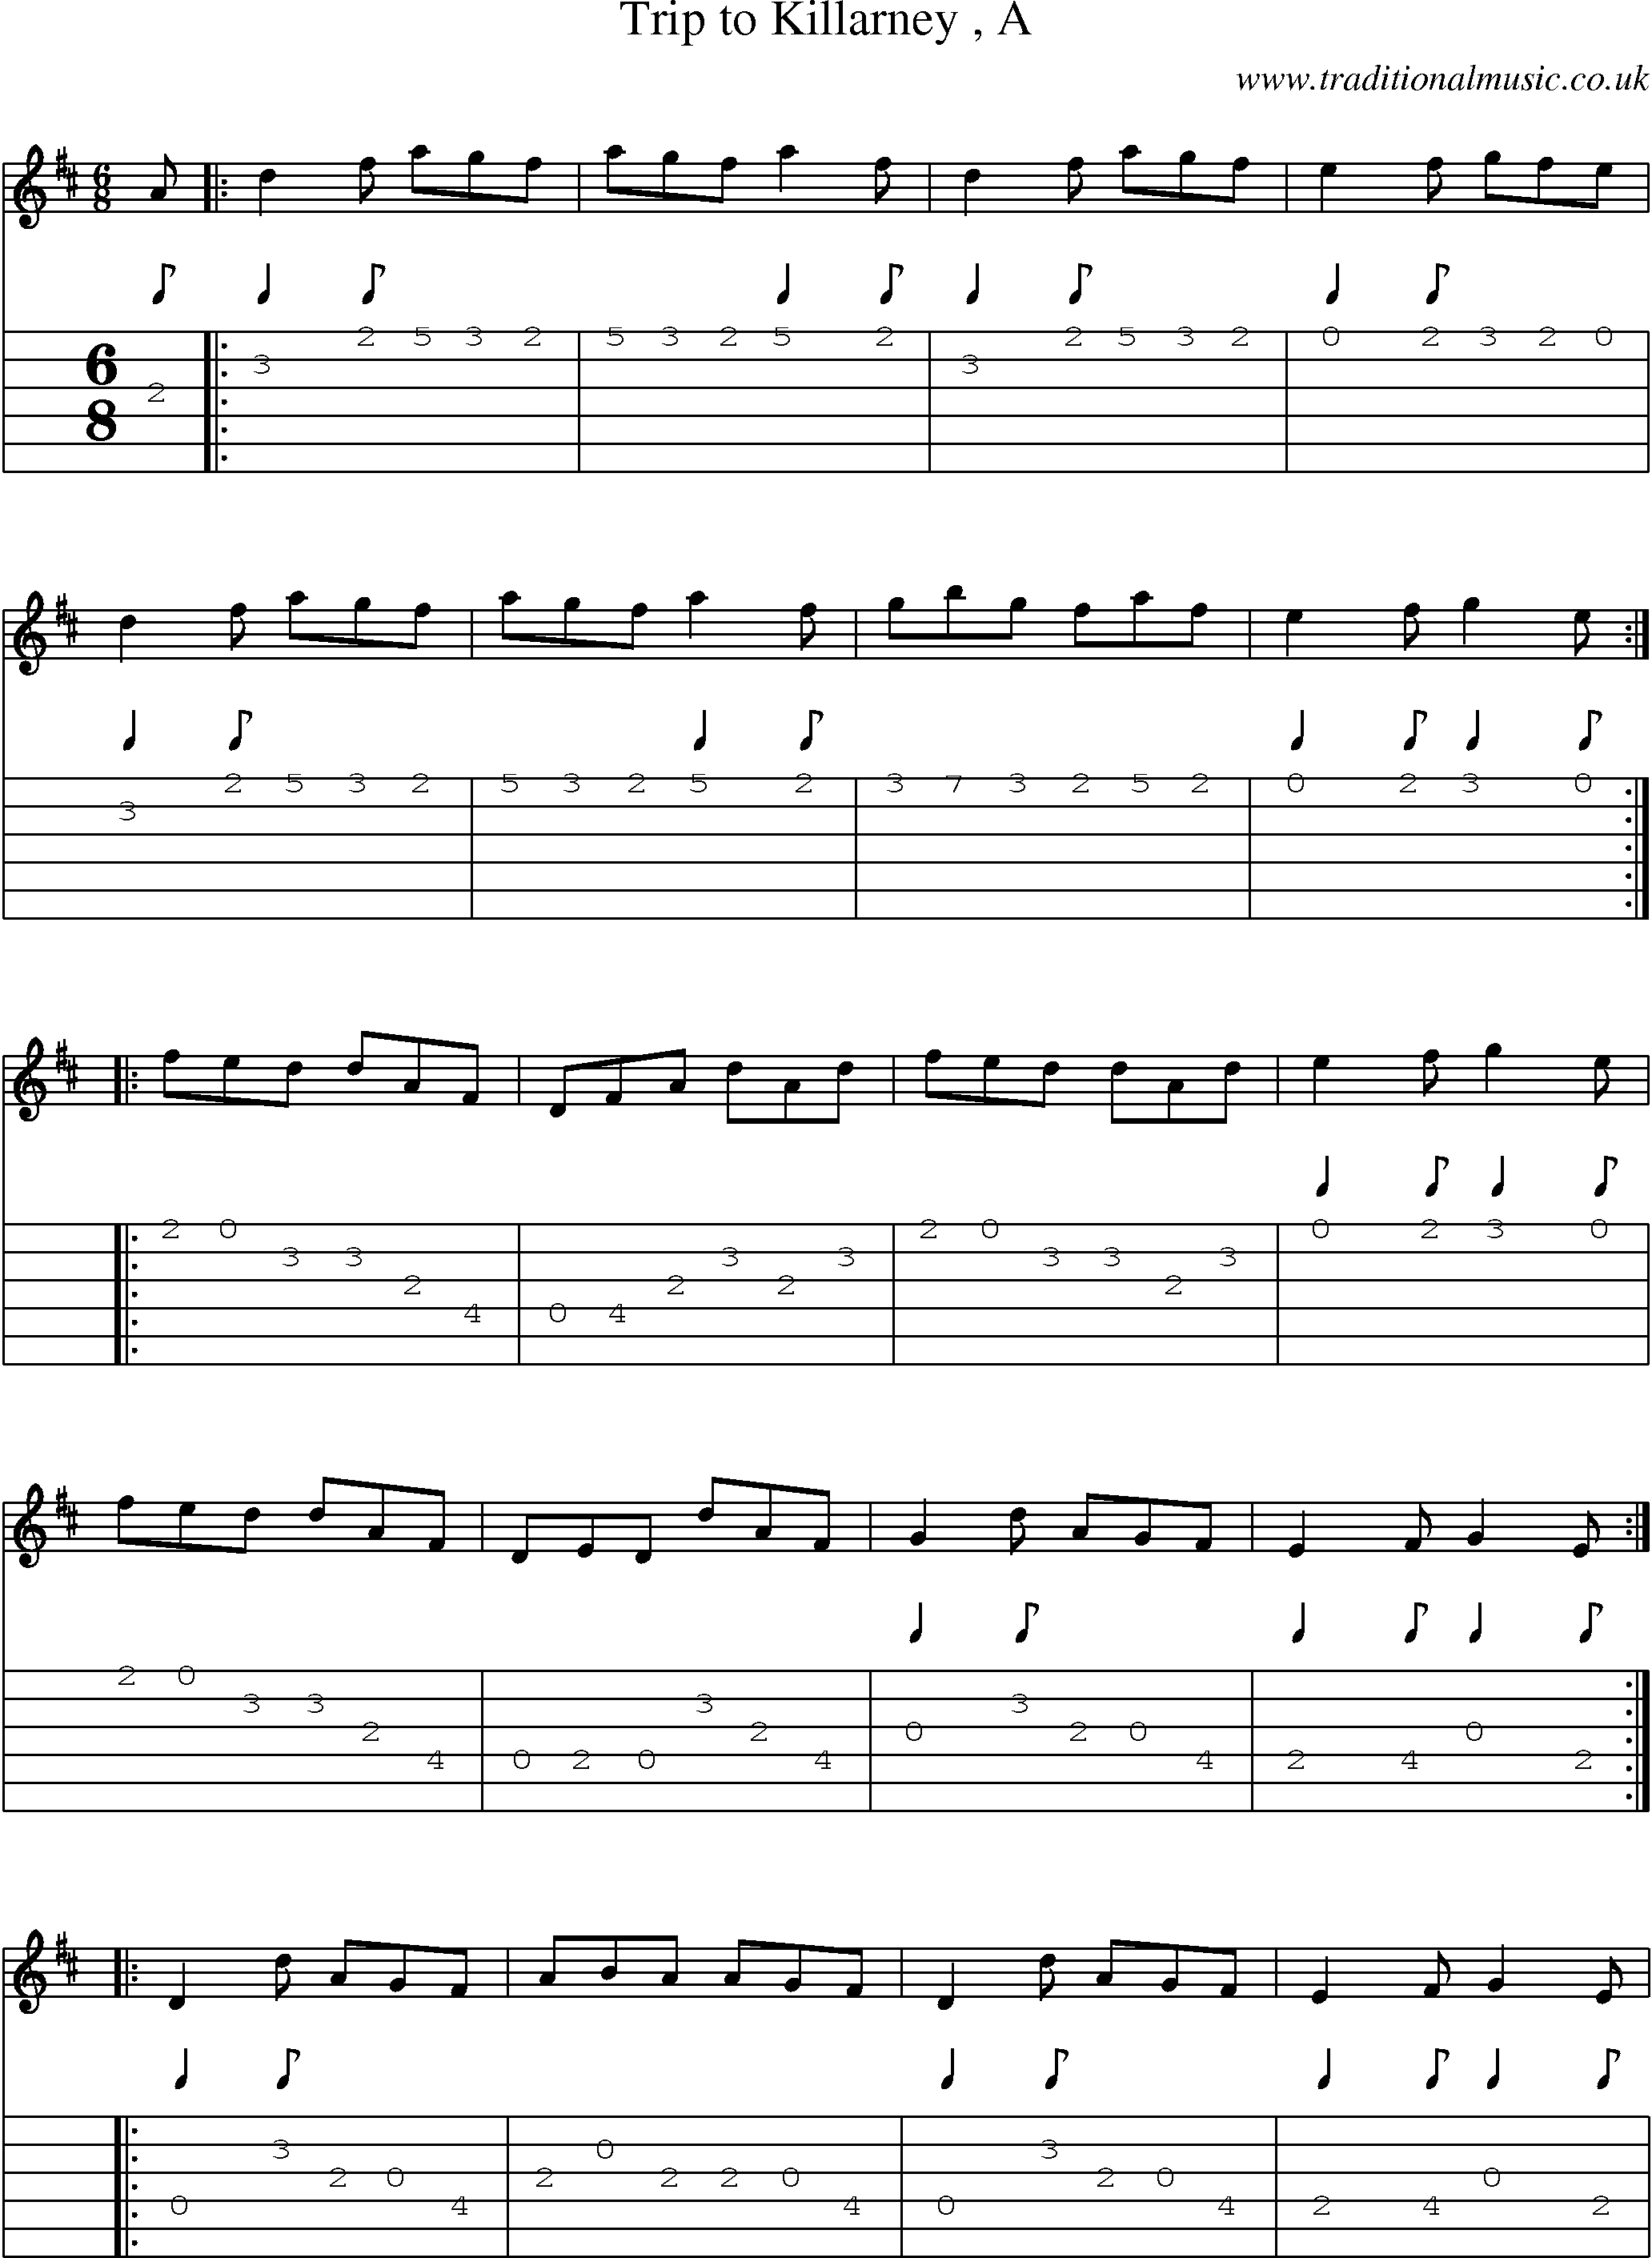 Music Score and Guitar Tabs for Trip To Killarney A